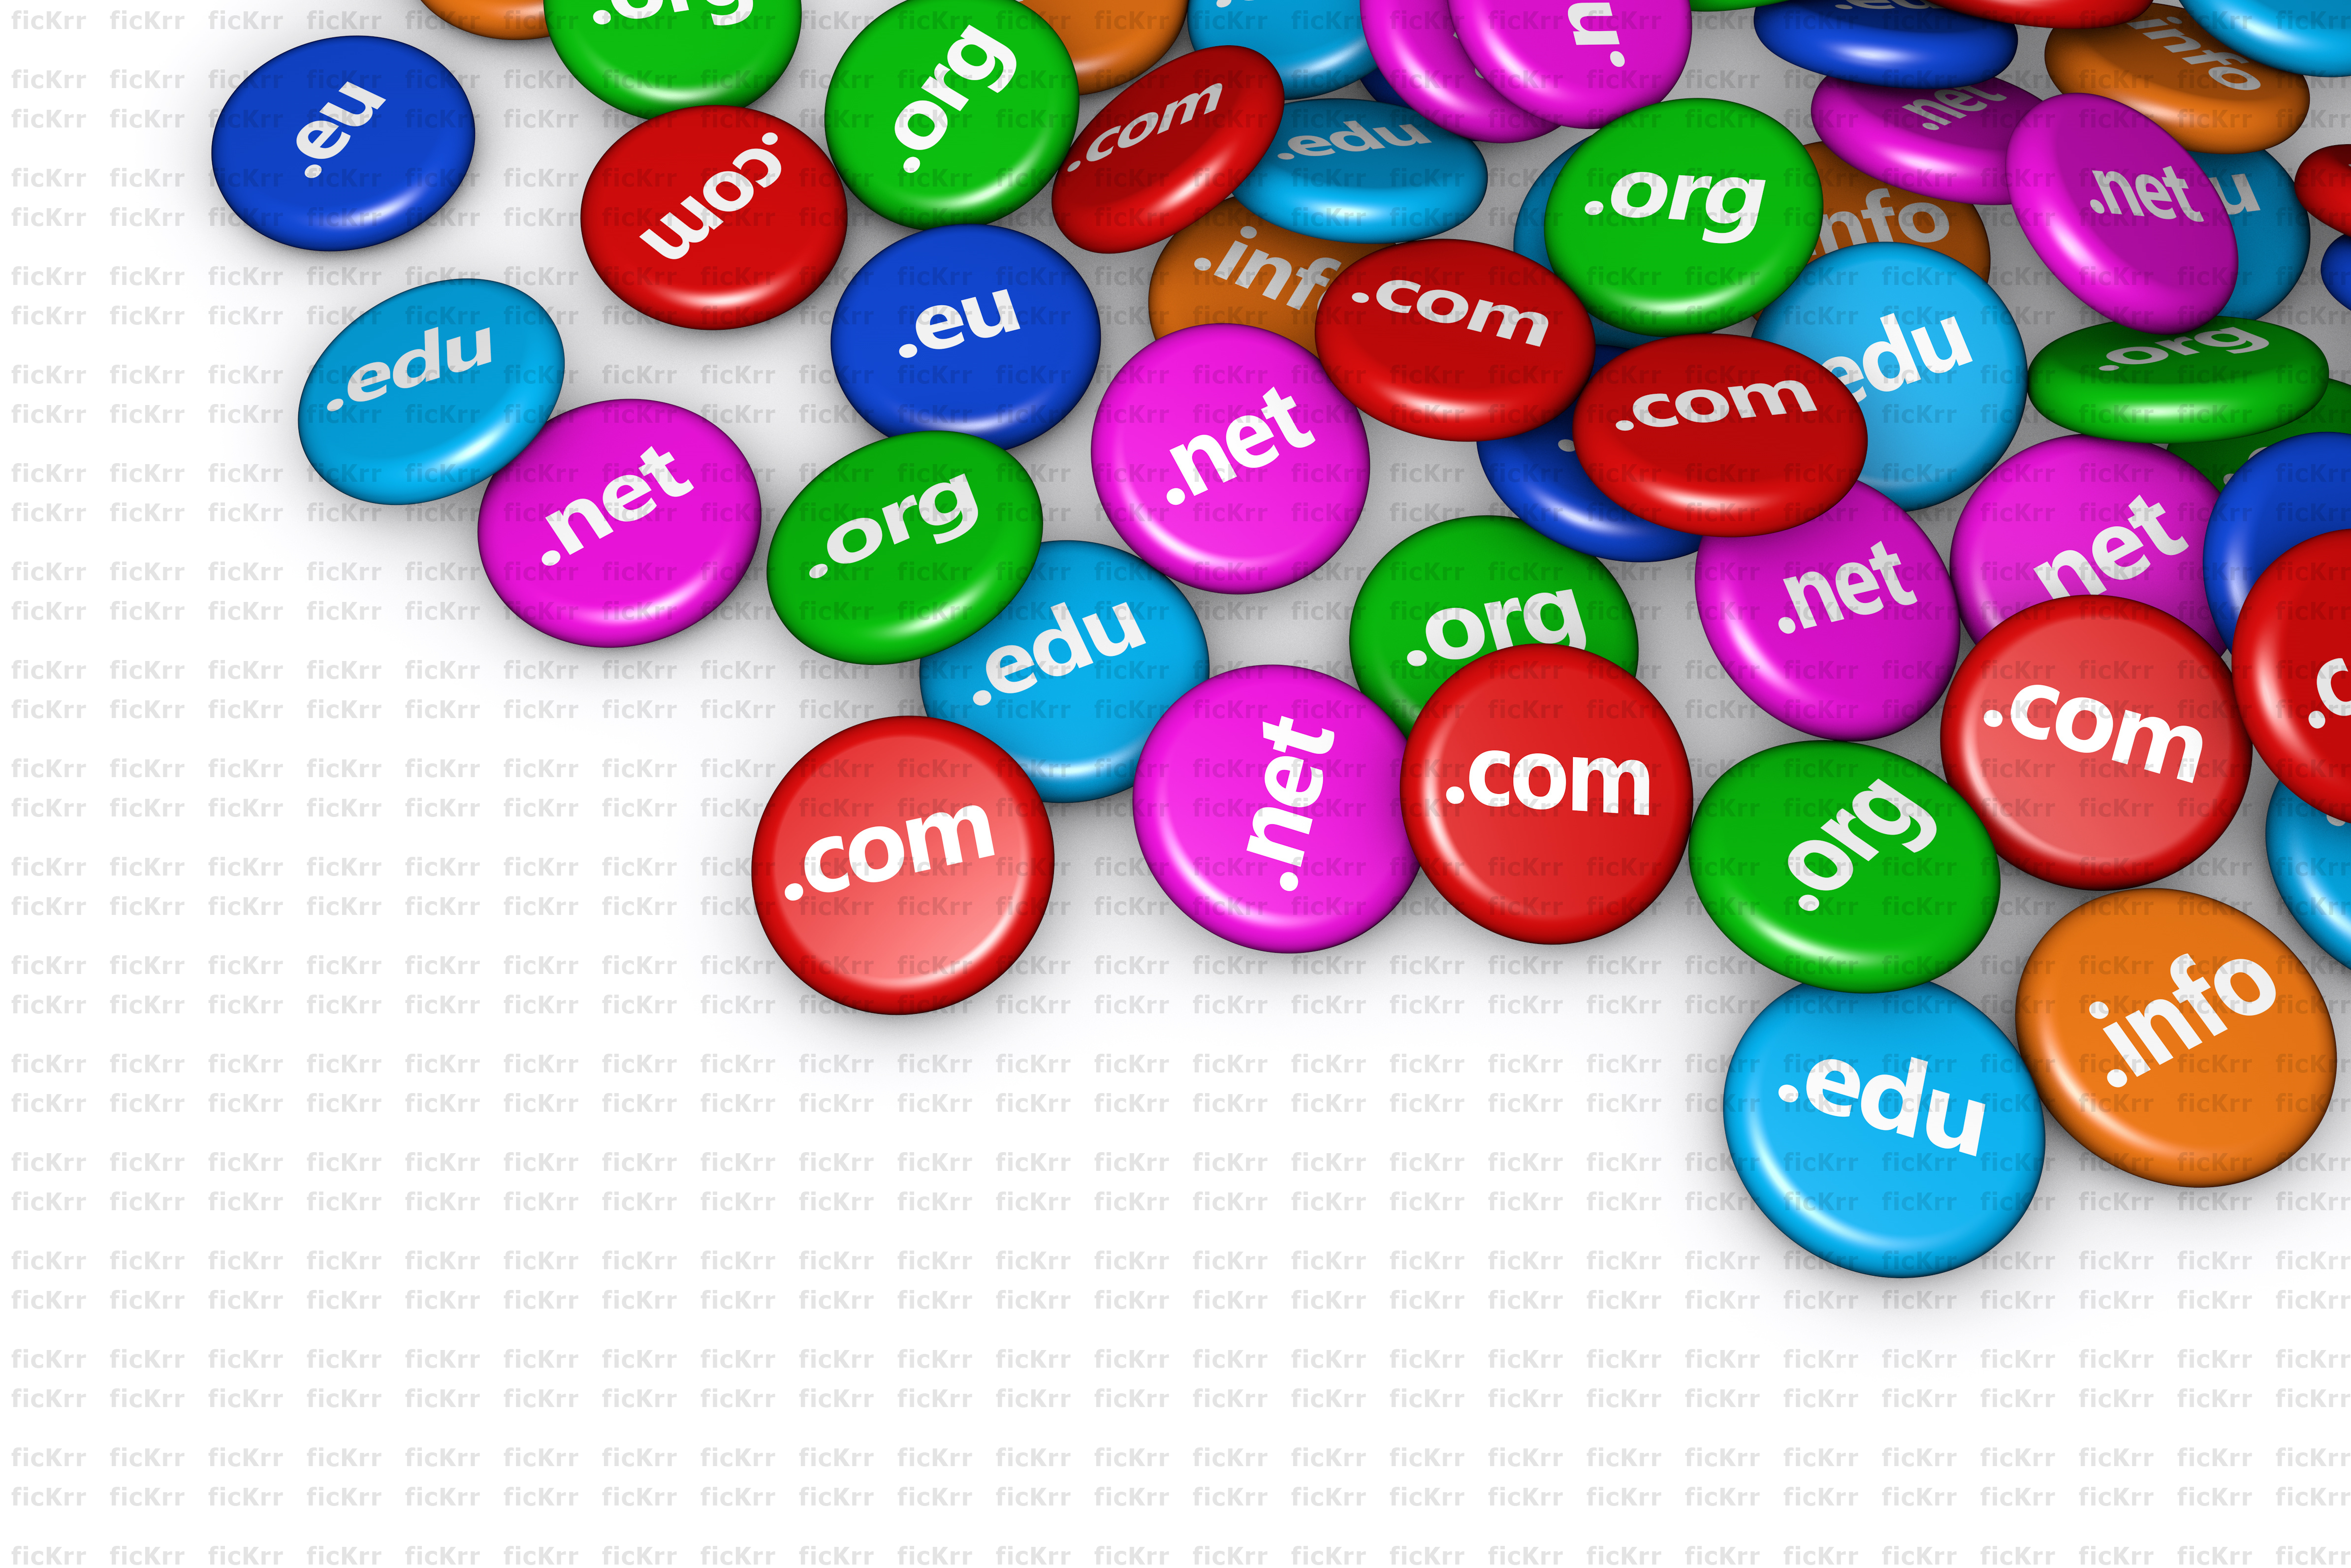 Top 10 million domains with rank (Free)